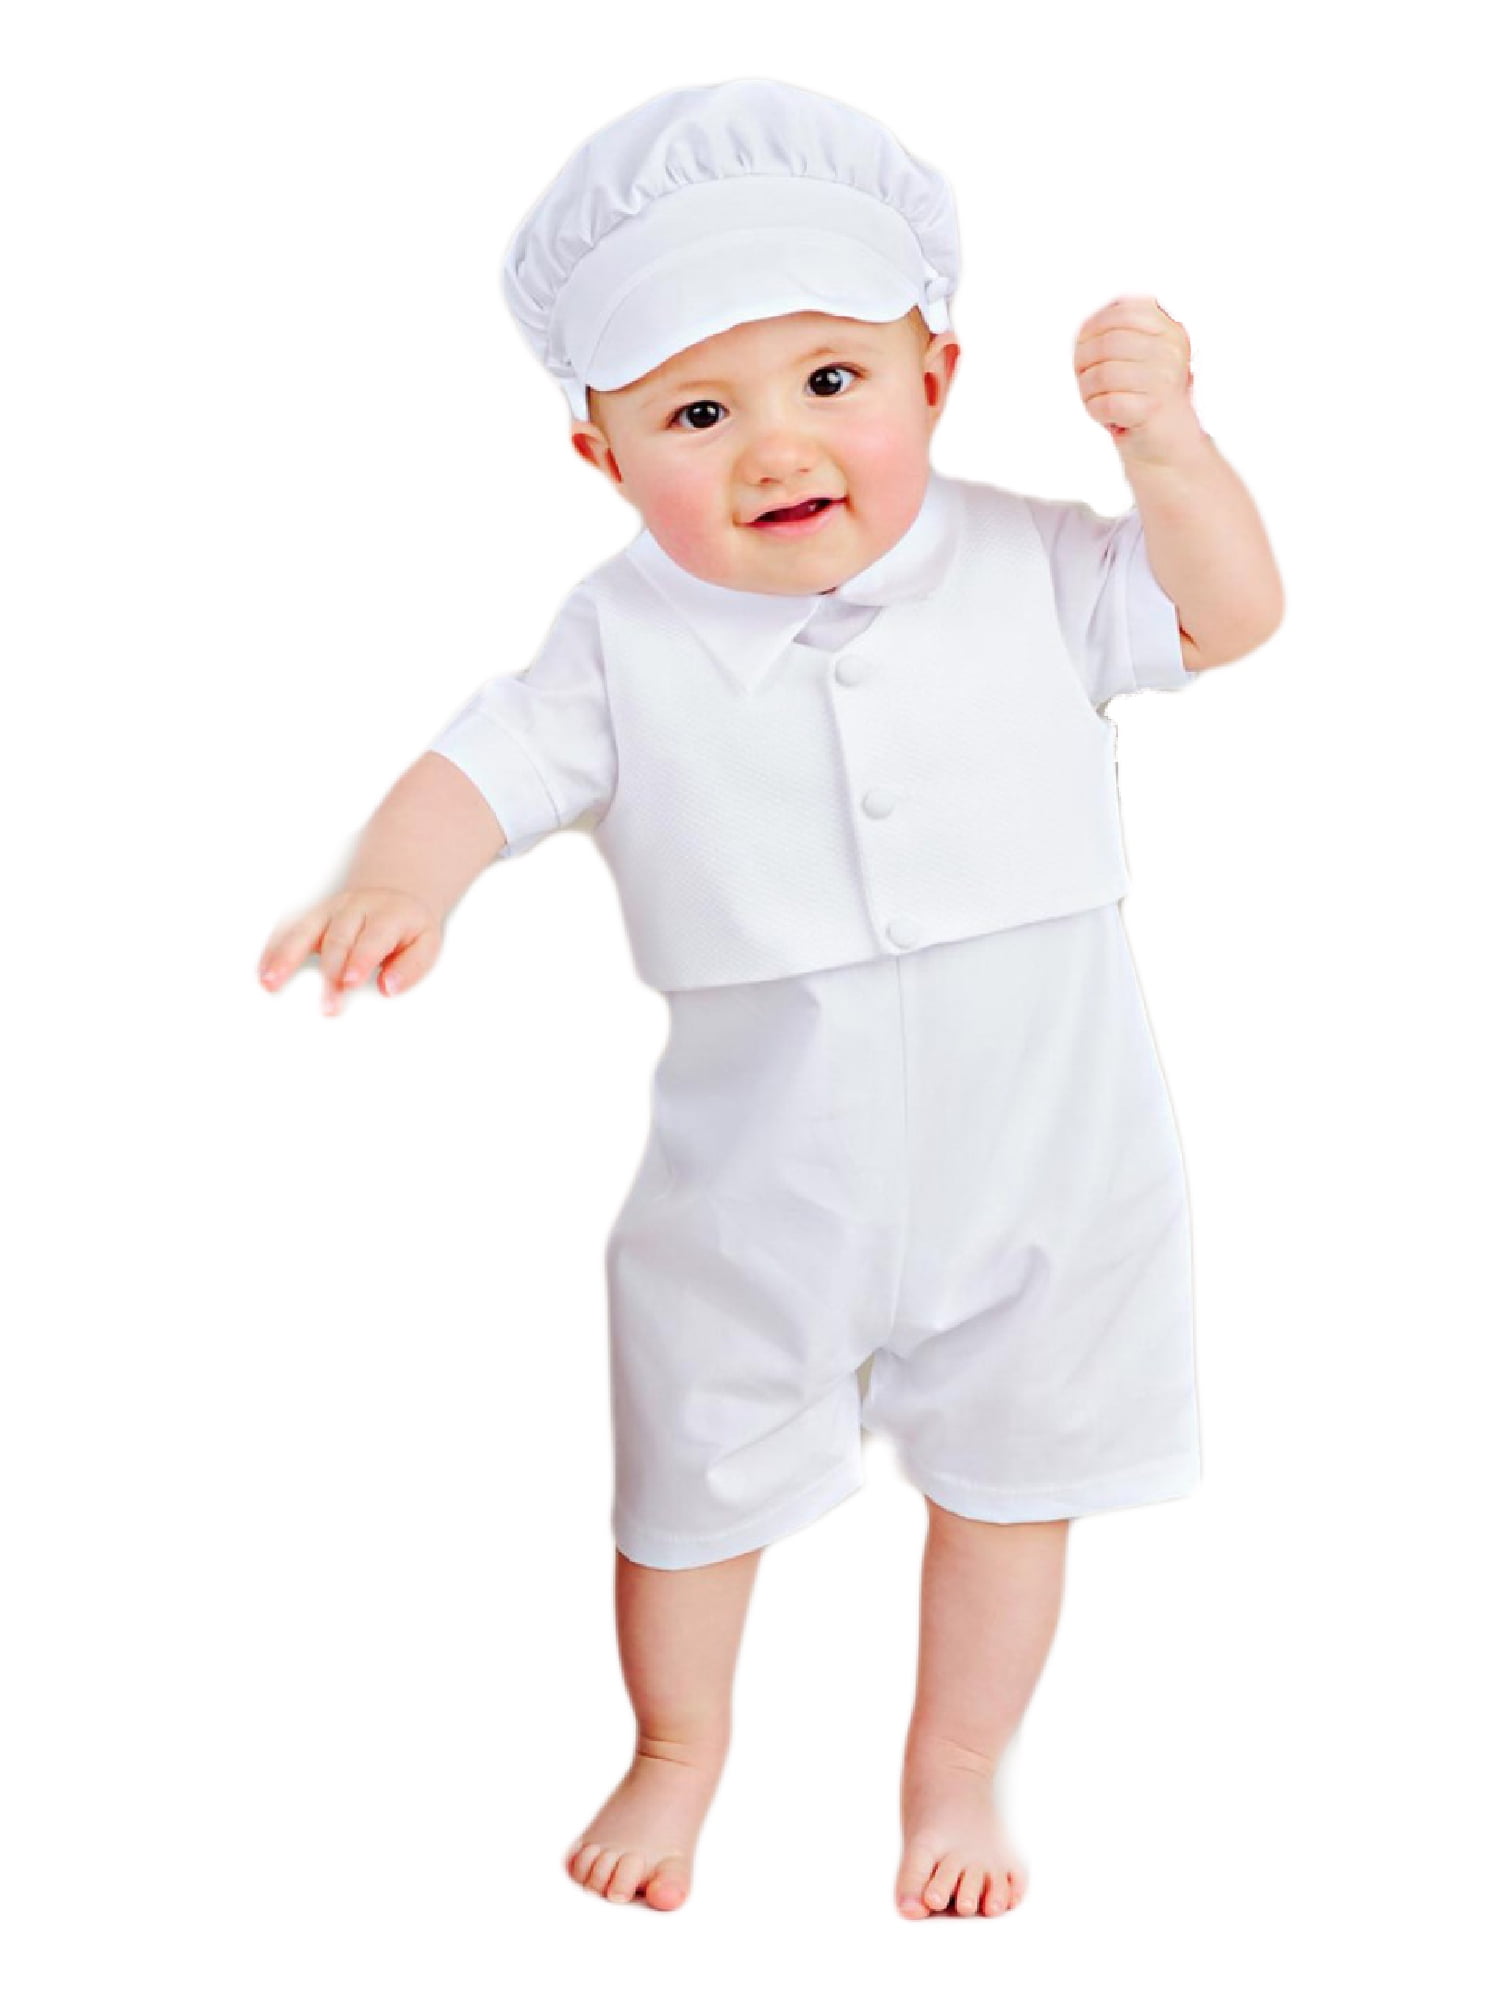 New Baby Toddler Boy Formal Church Christening Baptism Vest Suit Gown Set 0-4yr 